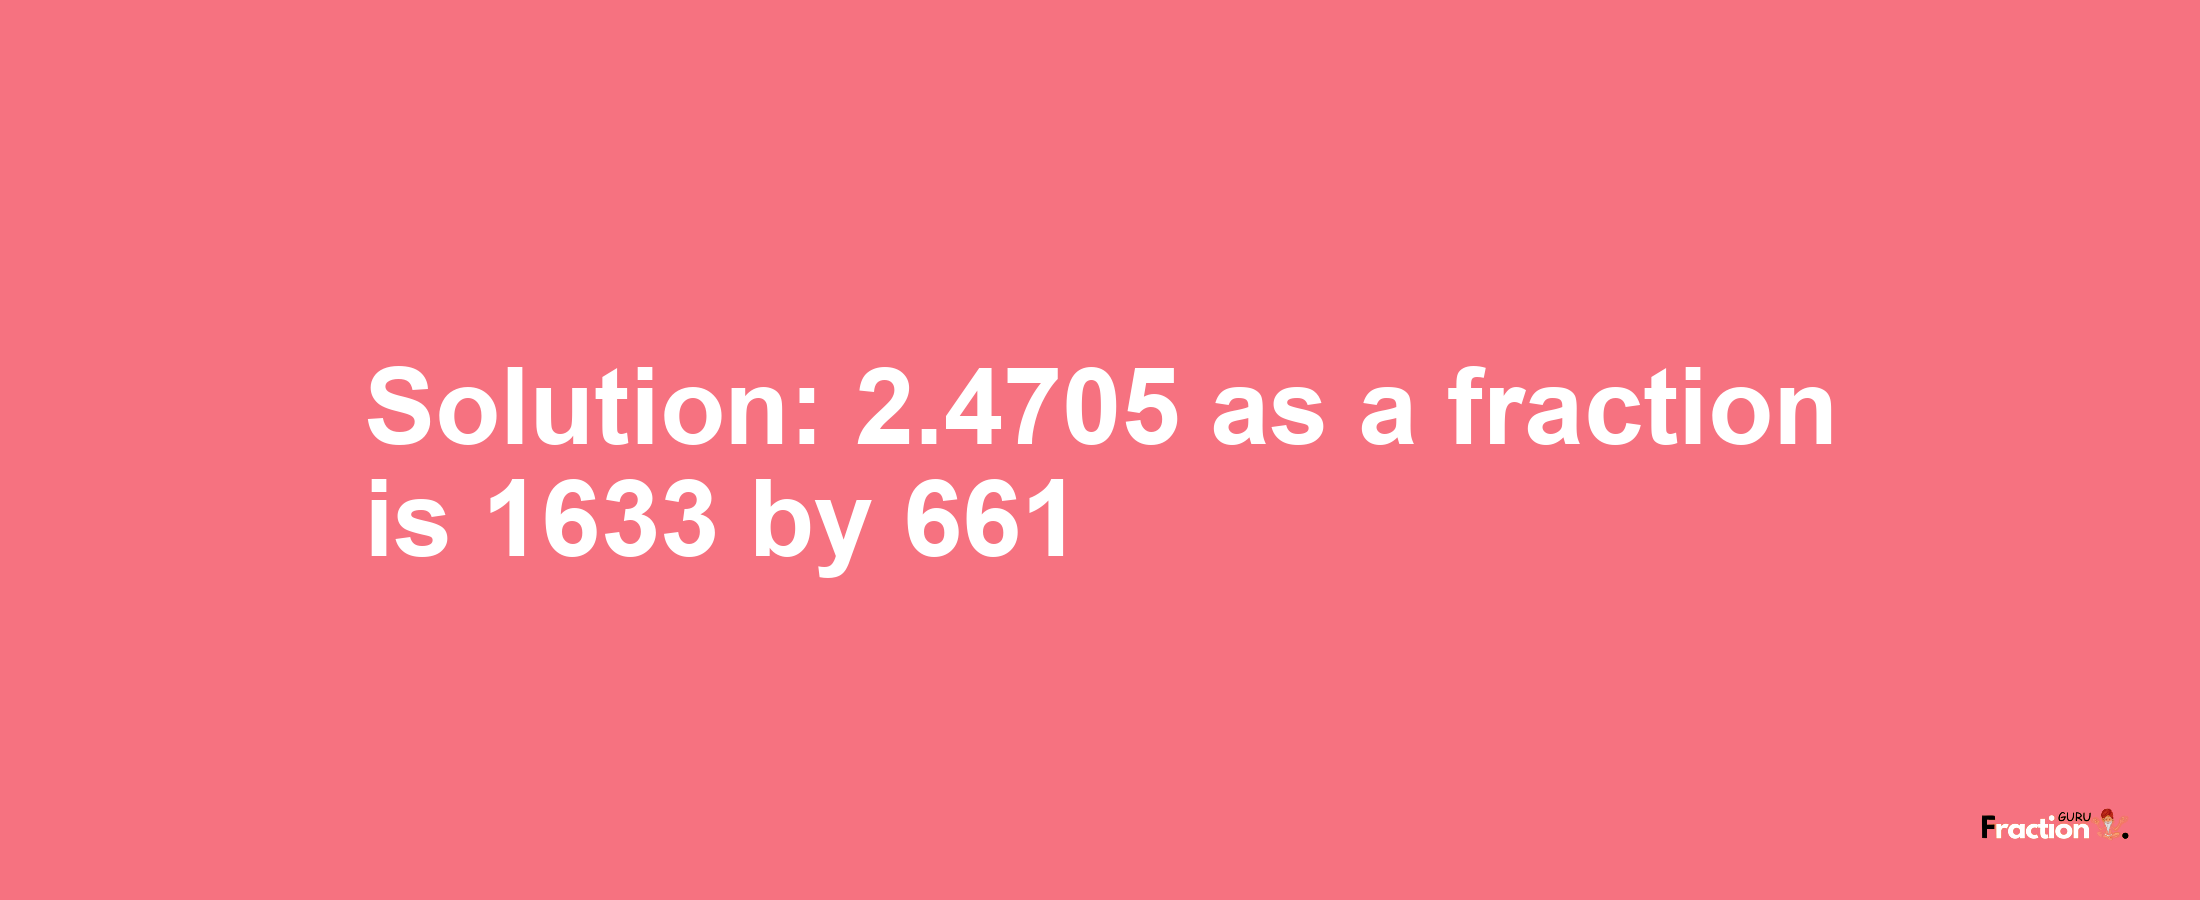 Solution:2.4705 as a fraction is 1633/661